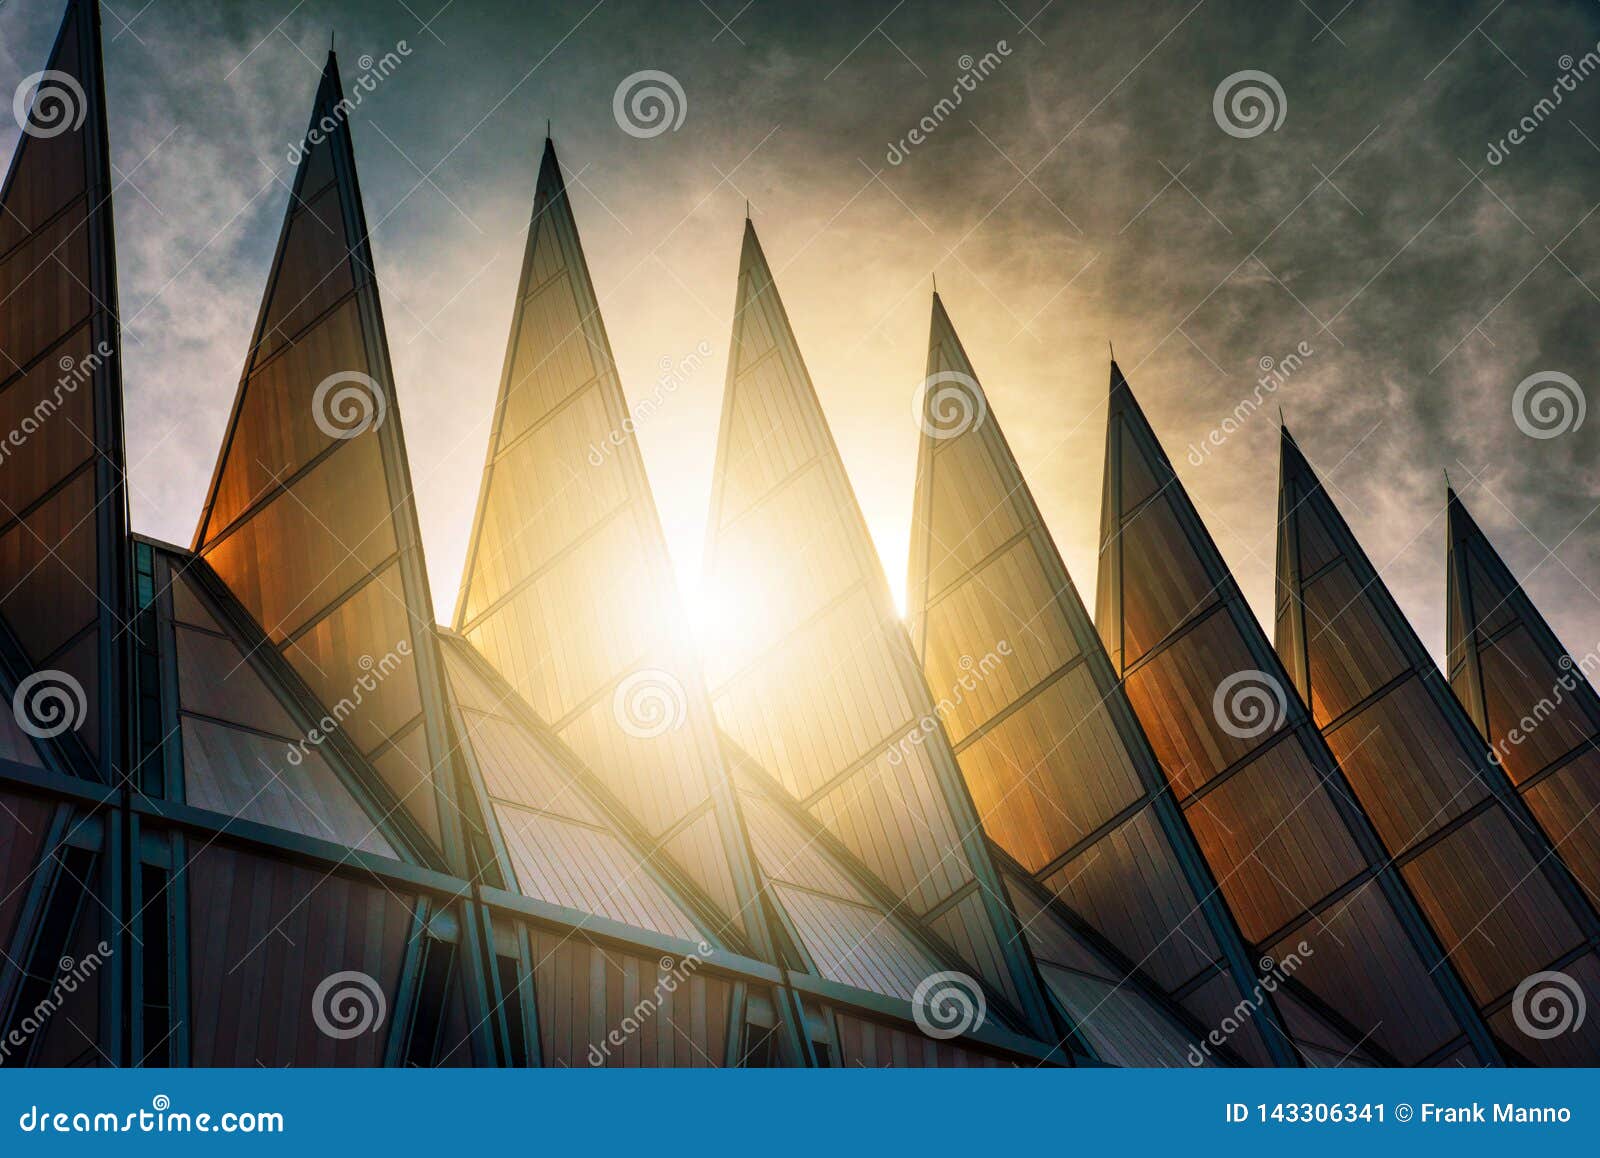 sunglow skirting the spires at the air force academy chapel